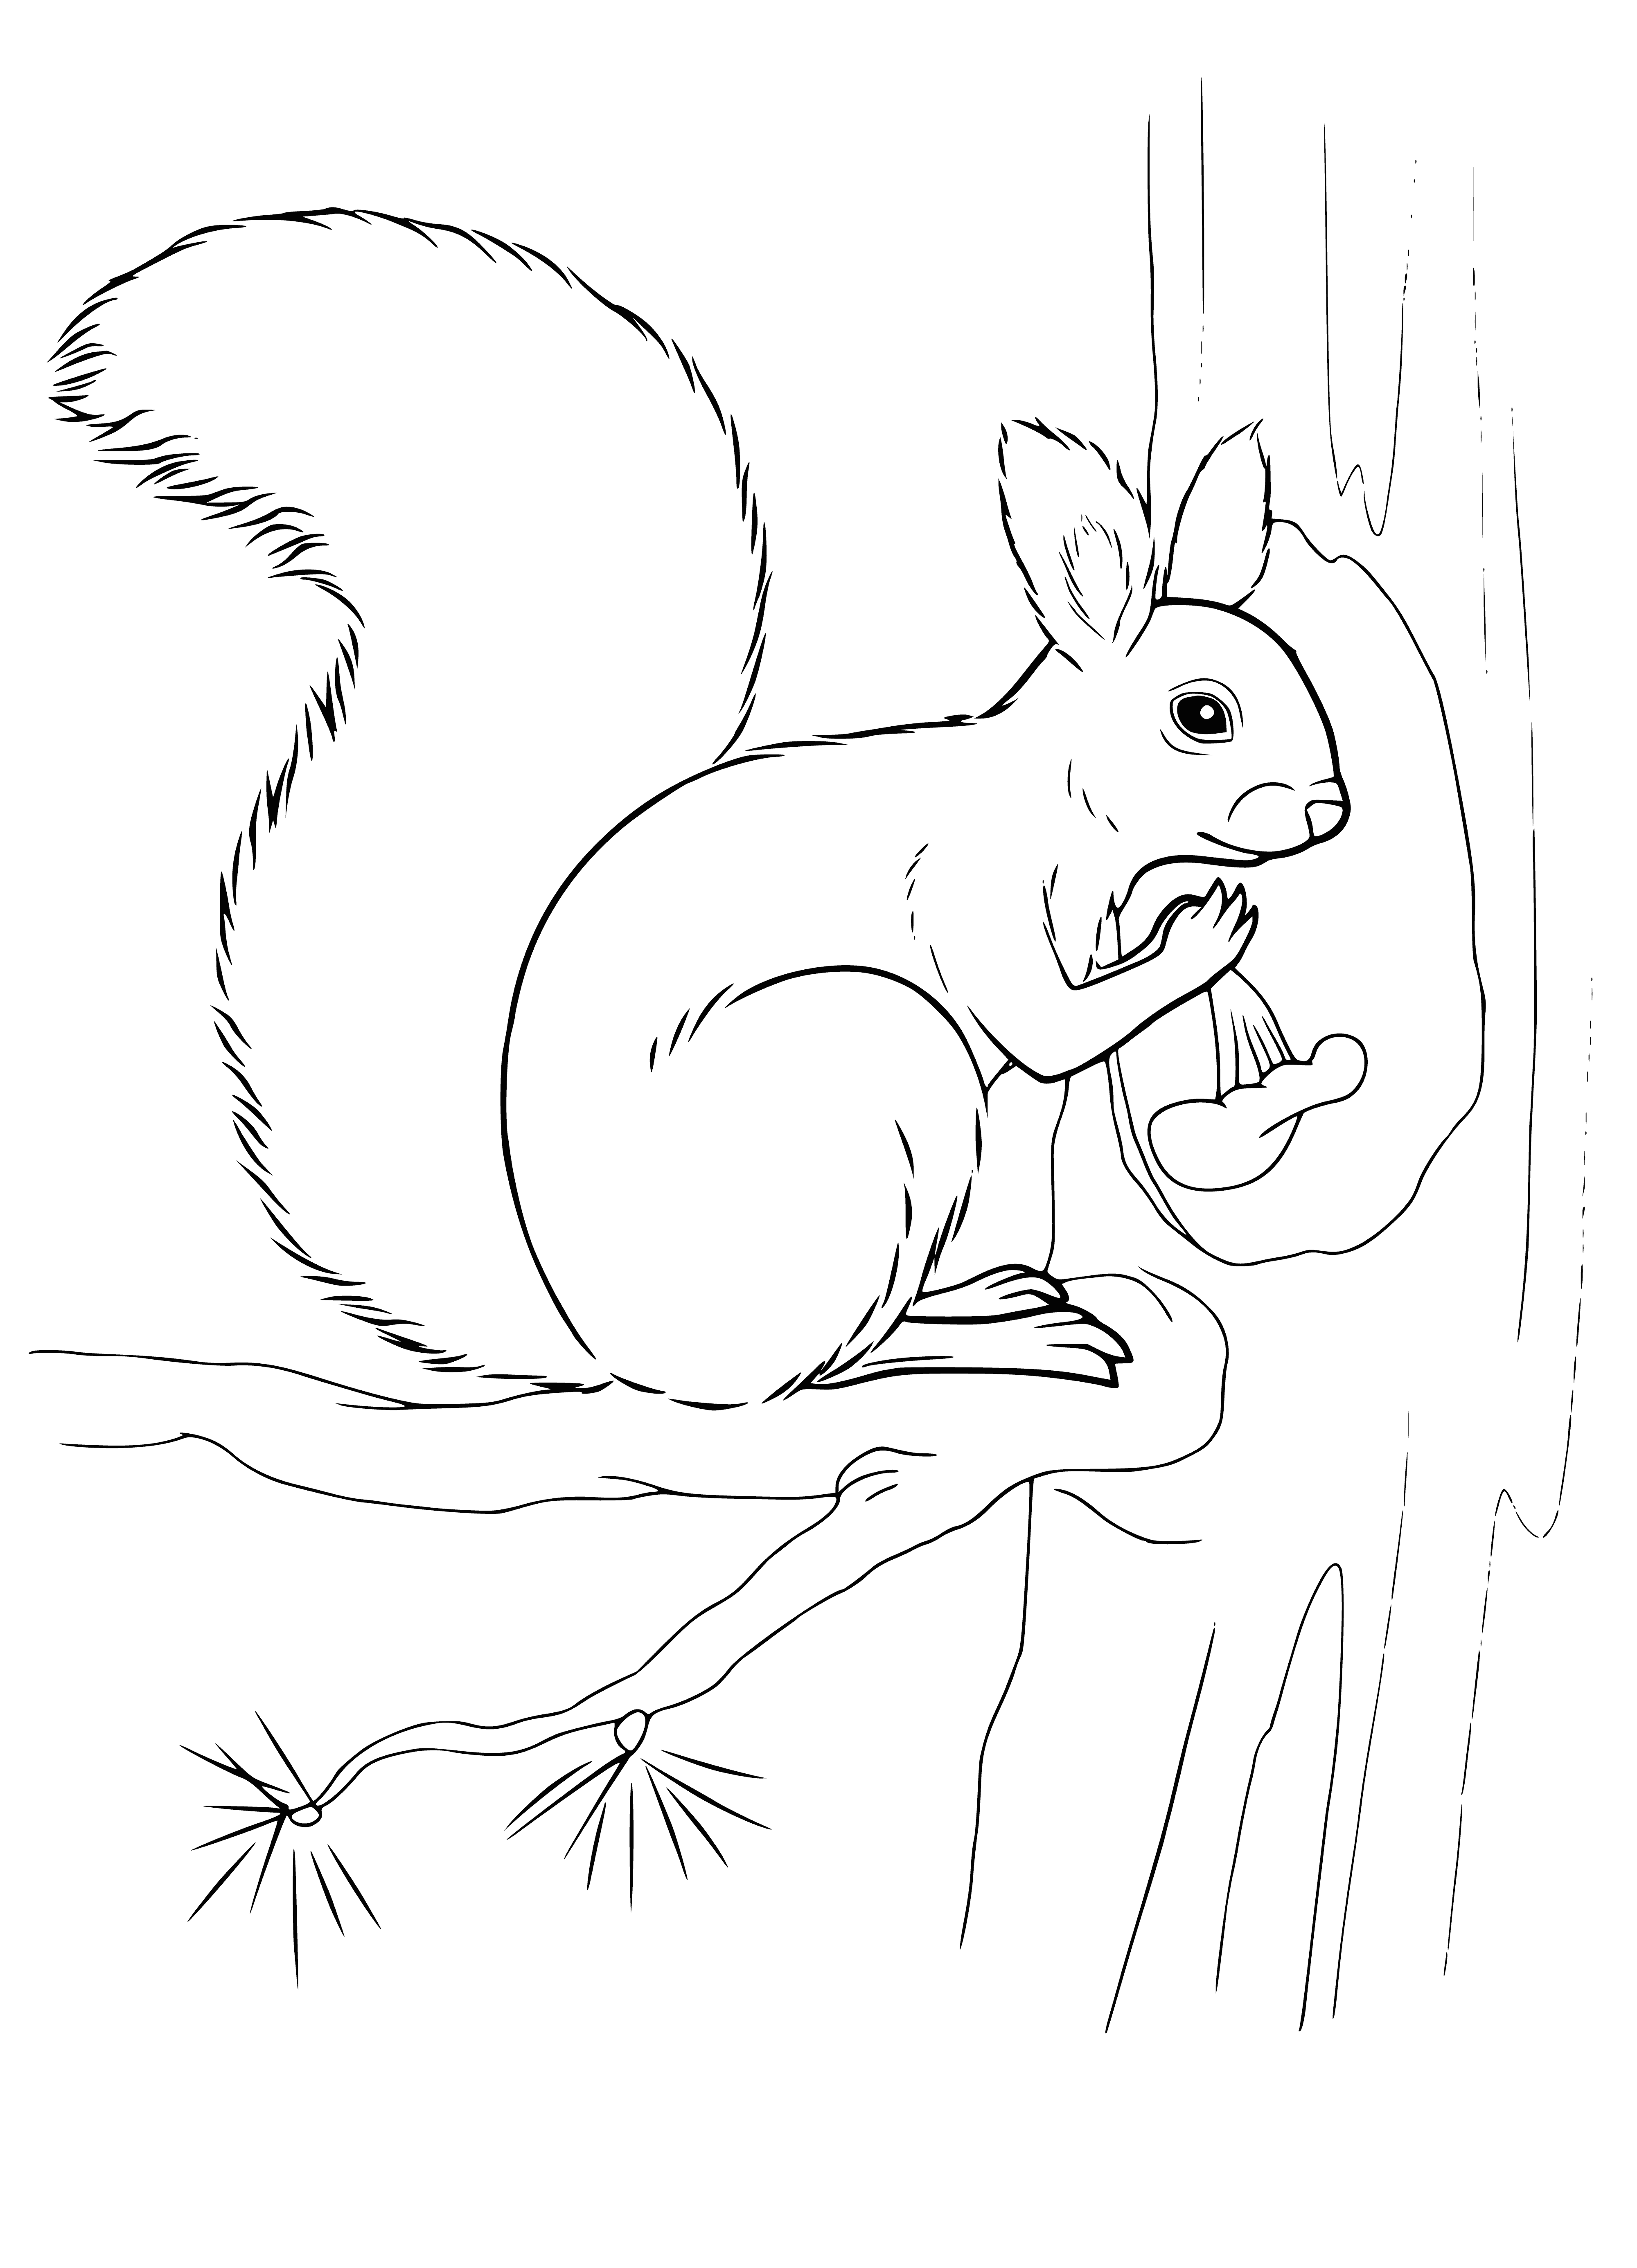 coloring page: Squirrel on branch in coloring page has large, pointy ears, brown and white fur and bushy tail.